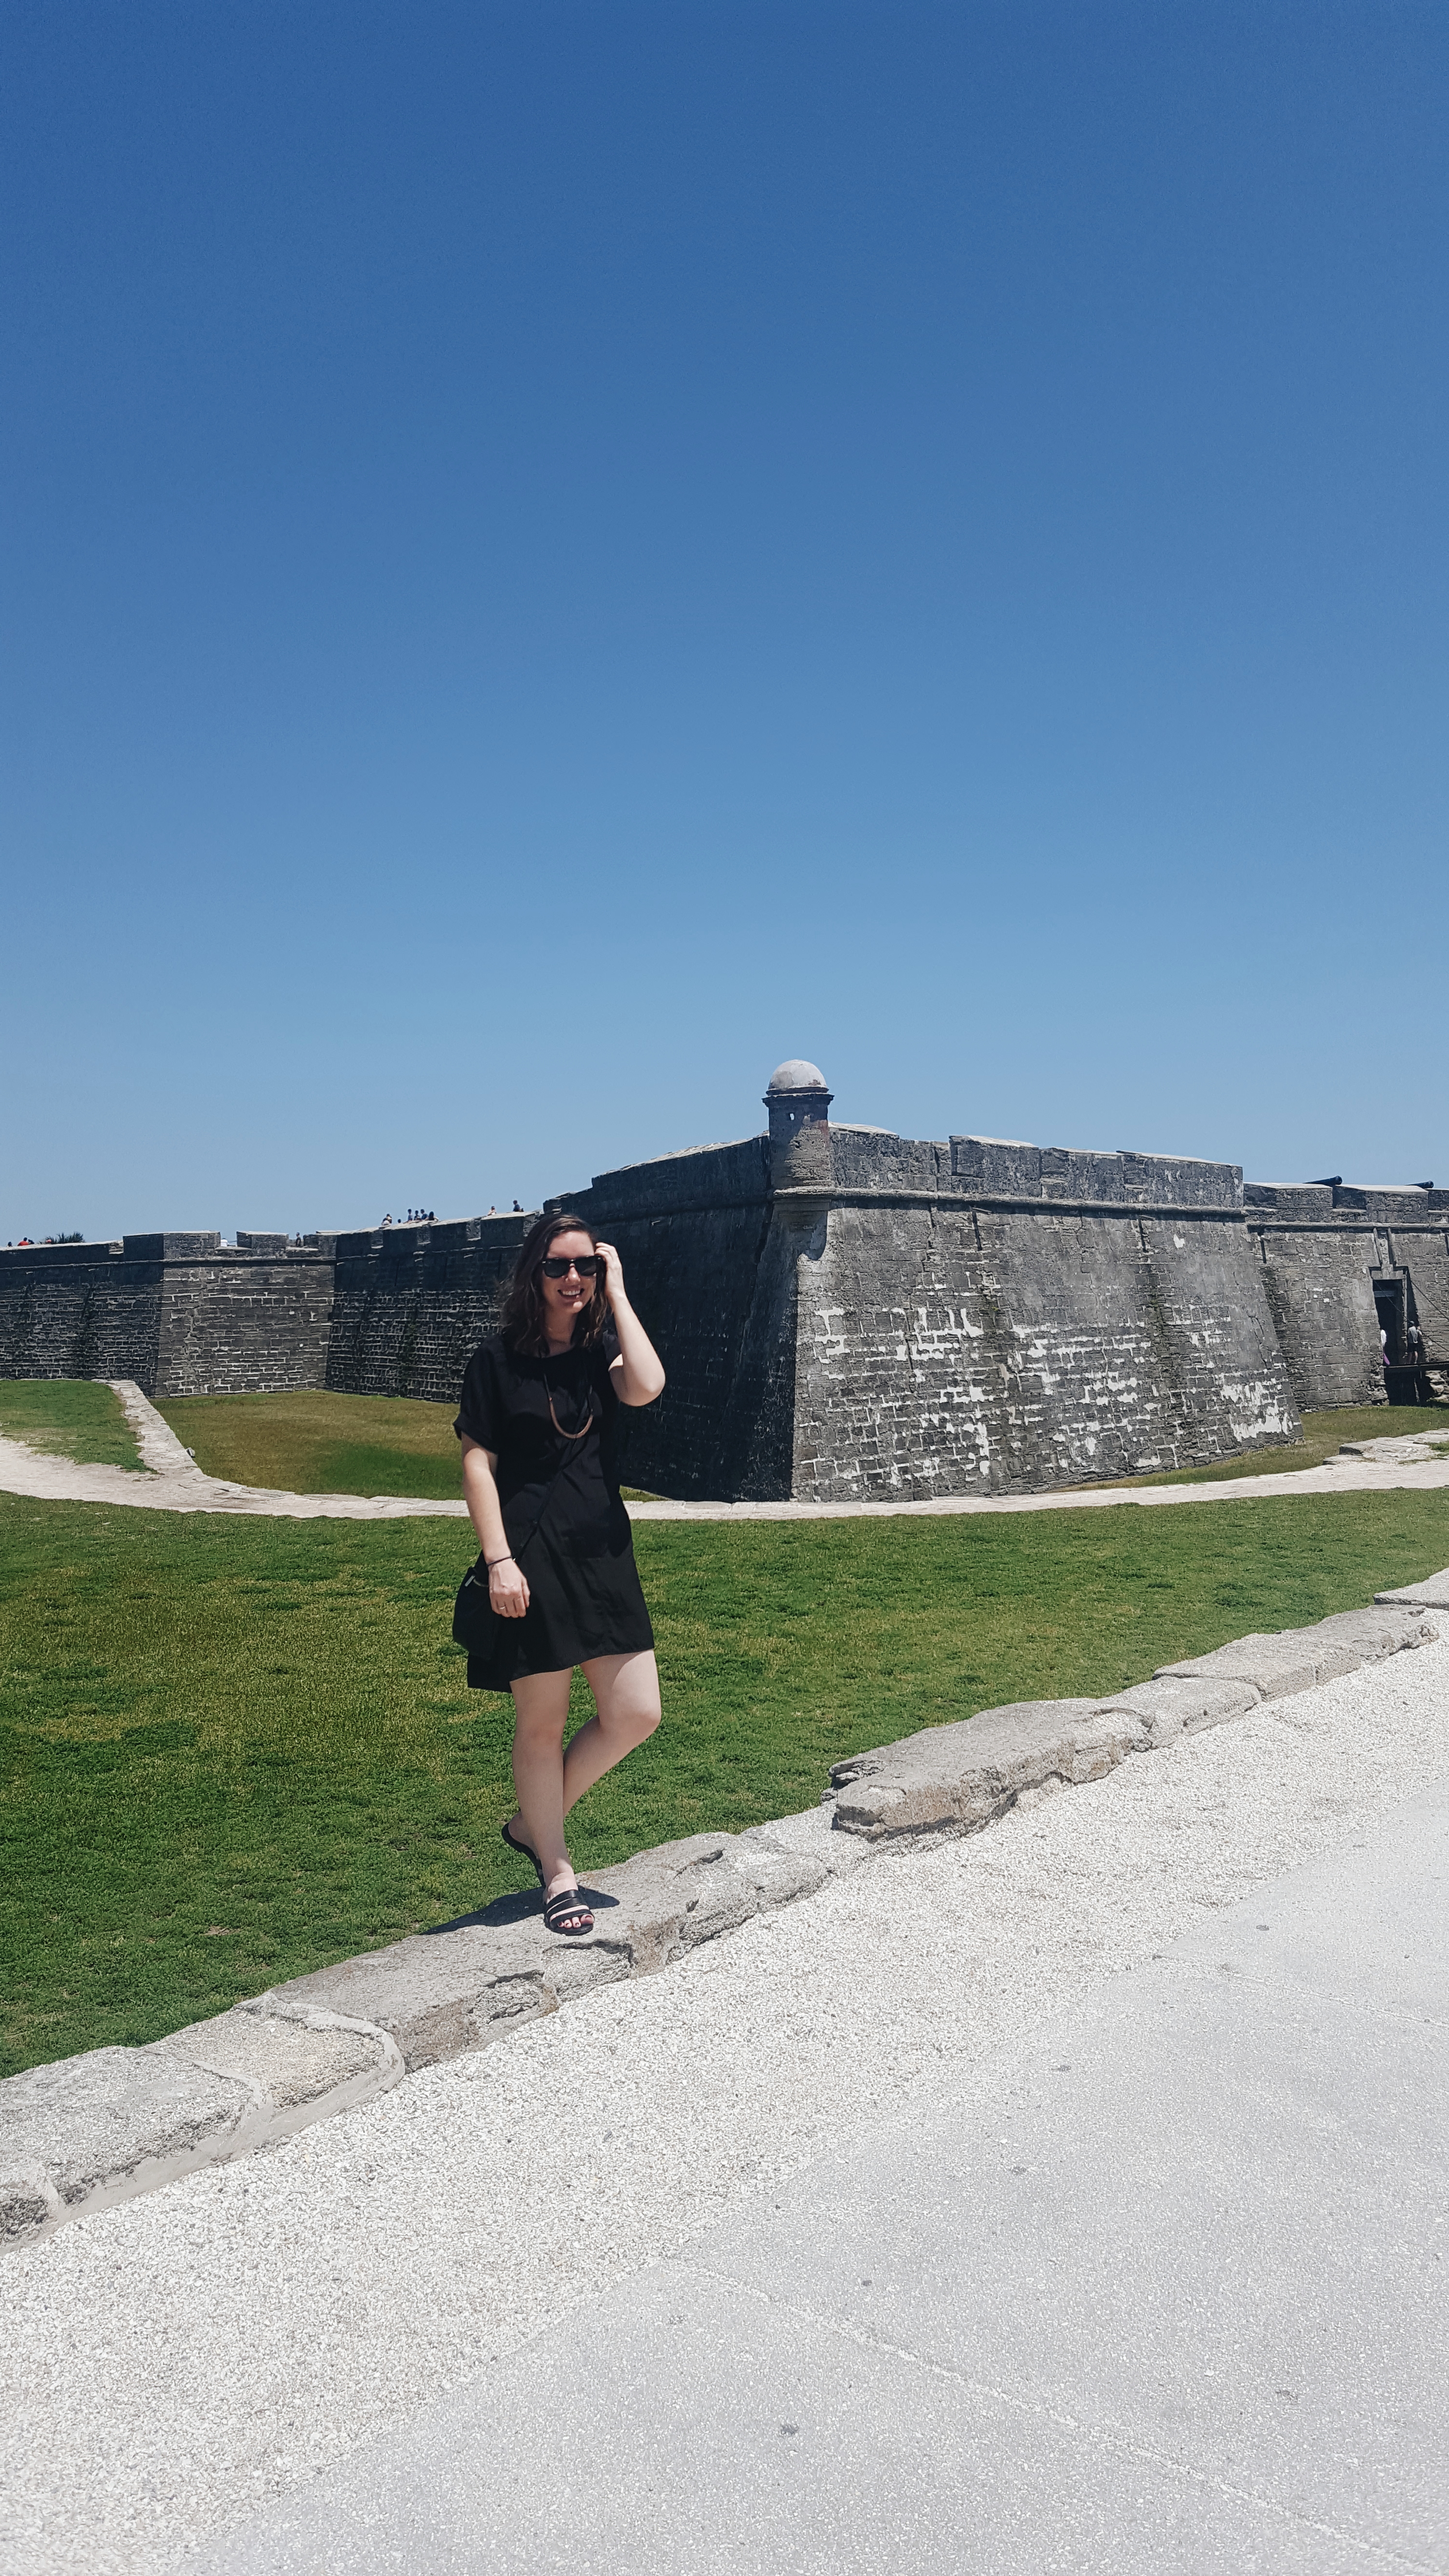 Alyssa stands in front of the St. Augustine fort in a black dress and sandals